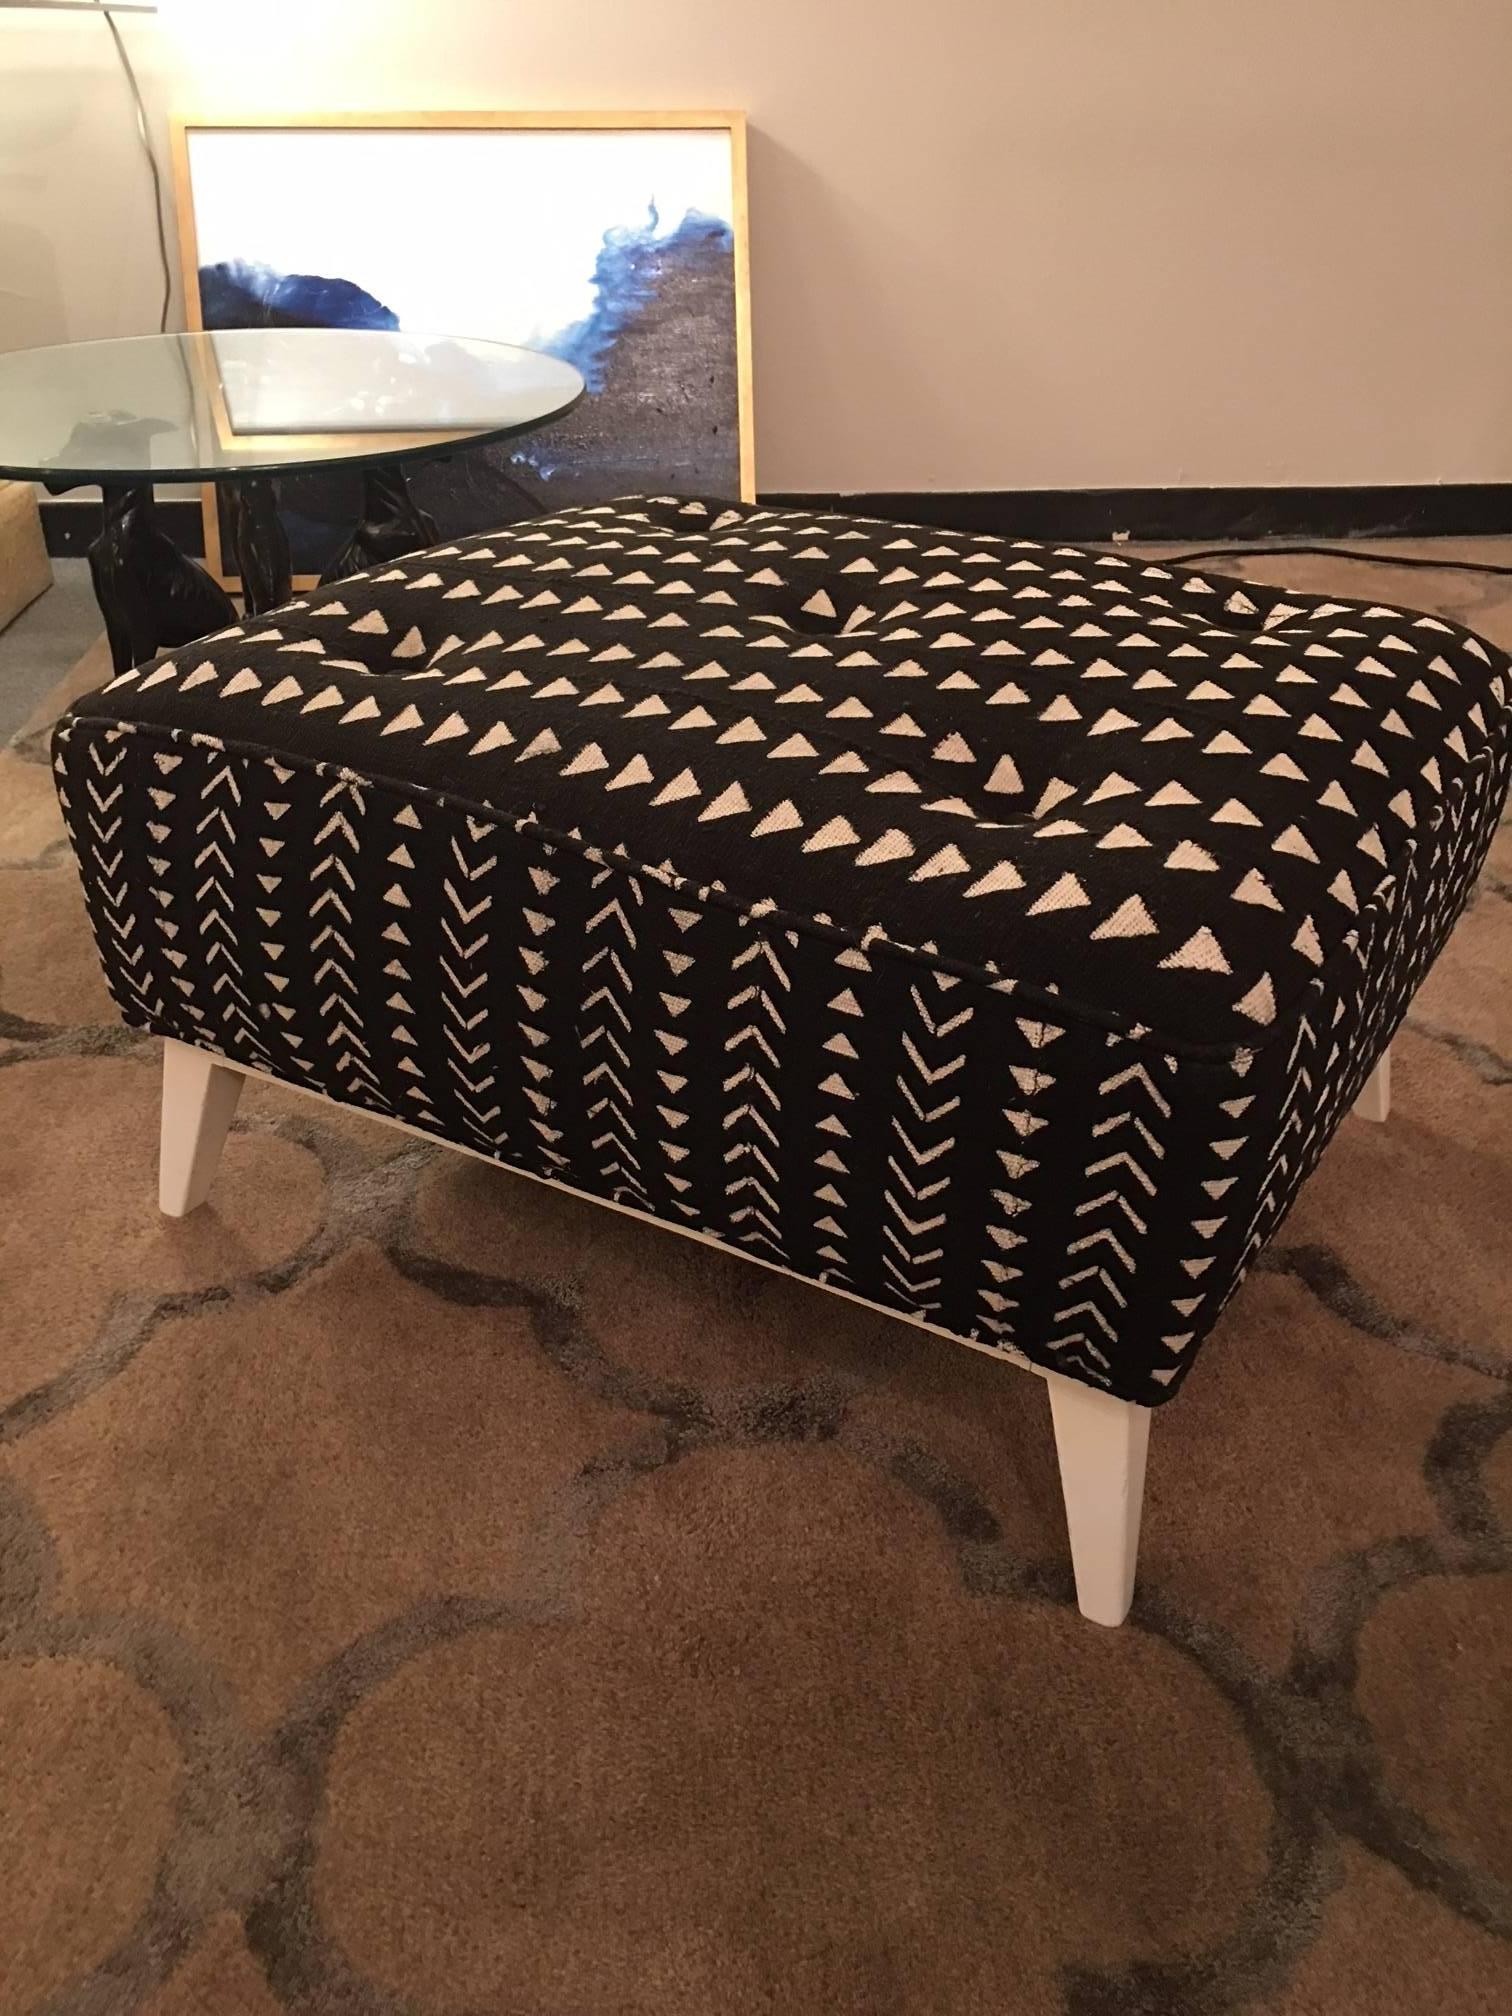 This midcentury ottoman by Robsjohn-Gibbings has been given a facelift with lacquered legs and wonderful mud cloth woven fabric from Africa in black and cream making this a one-of-a-kind piece to grace your eclectic interior.